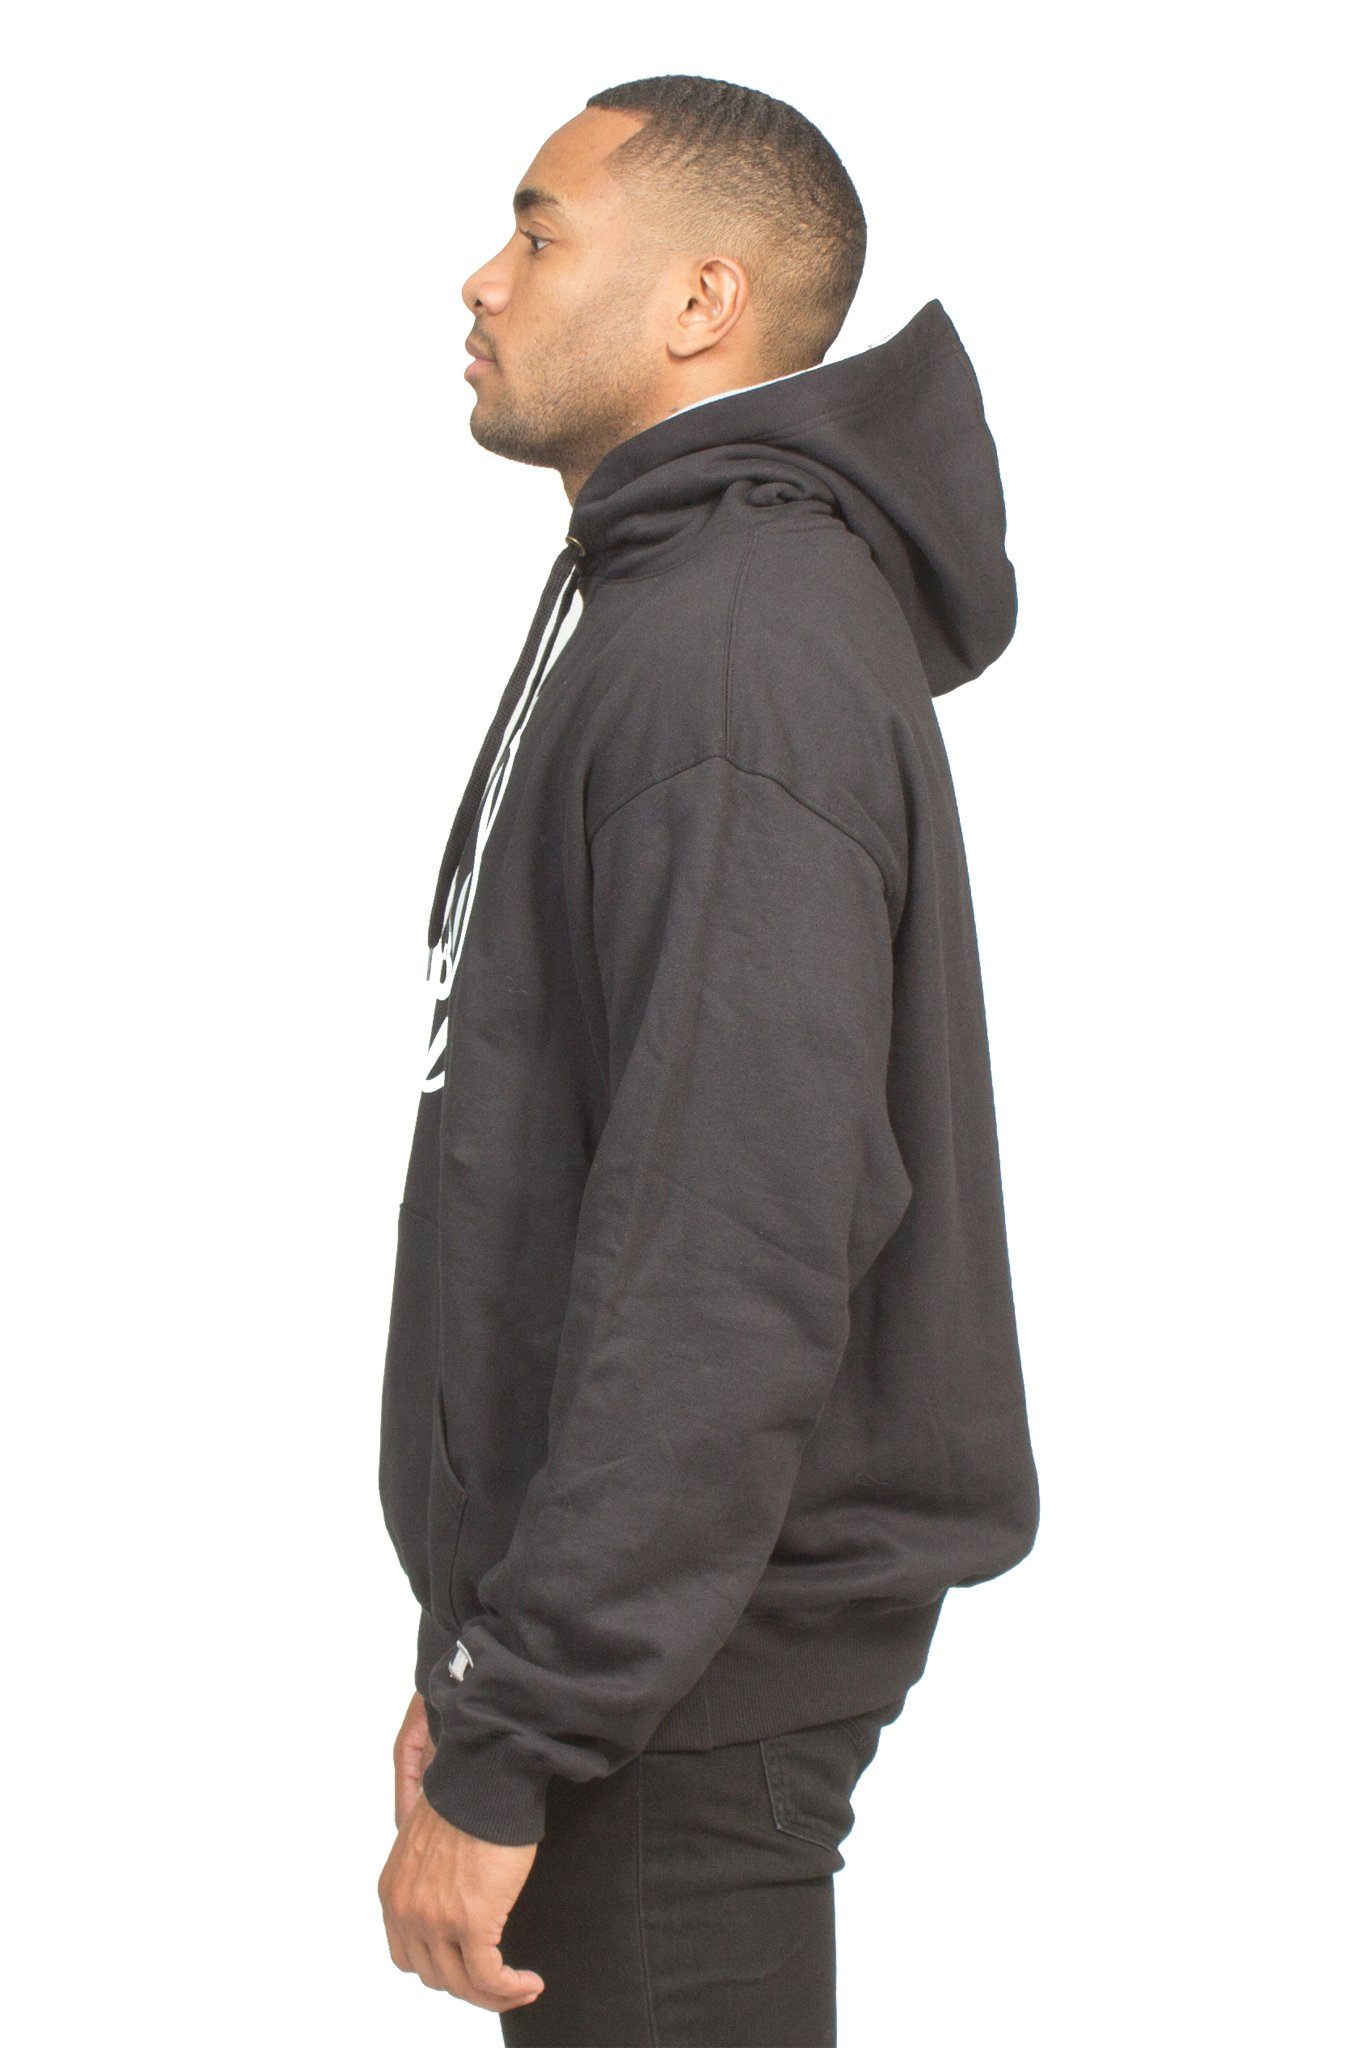 CHAMPION BIG FACE PLRB OVERSIZED HOODIE IN BLACK | Poor Little Rich Boy Clothing